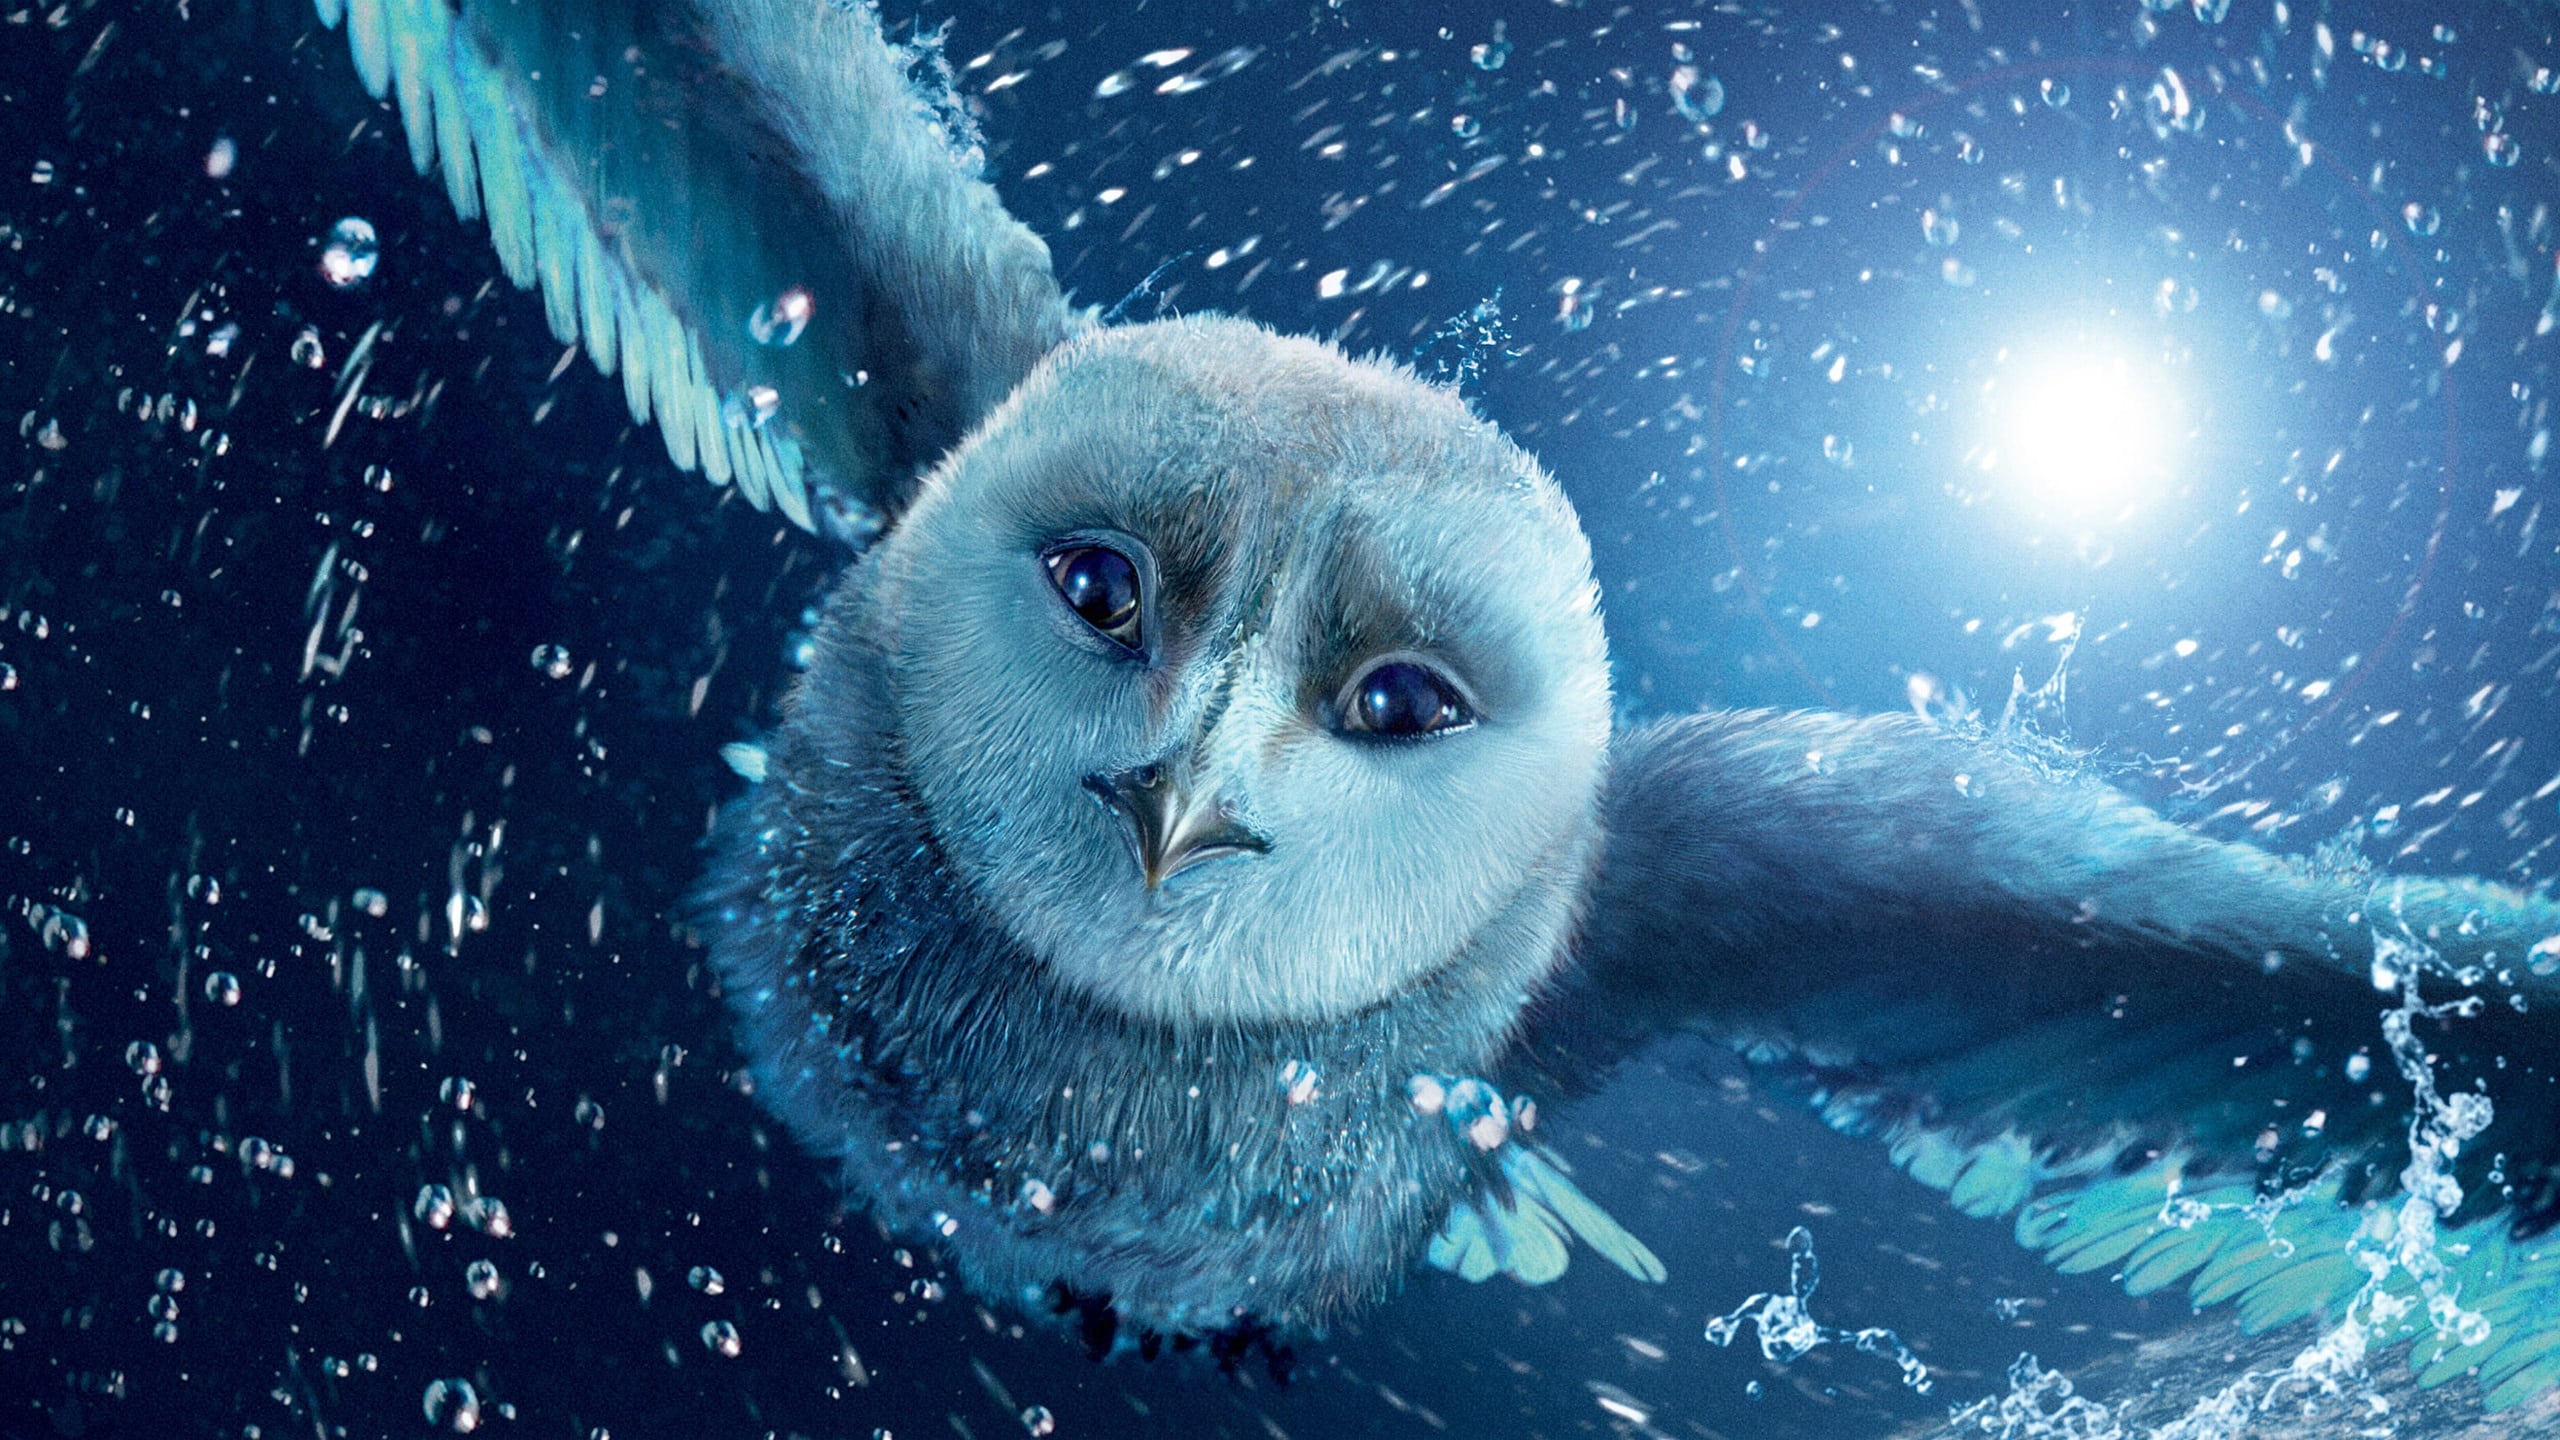 Legend of the Guardians: The Owls of Ga’Hoole 2010 123movies